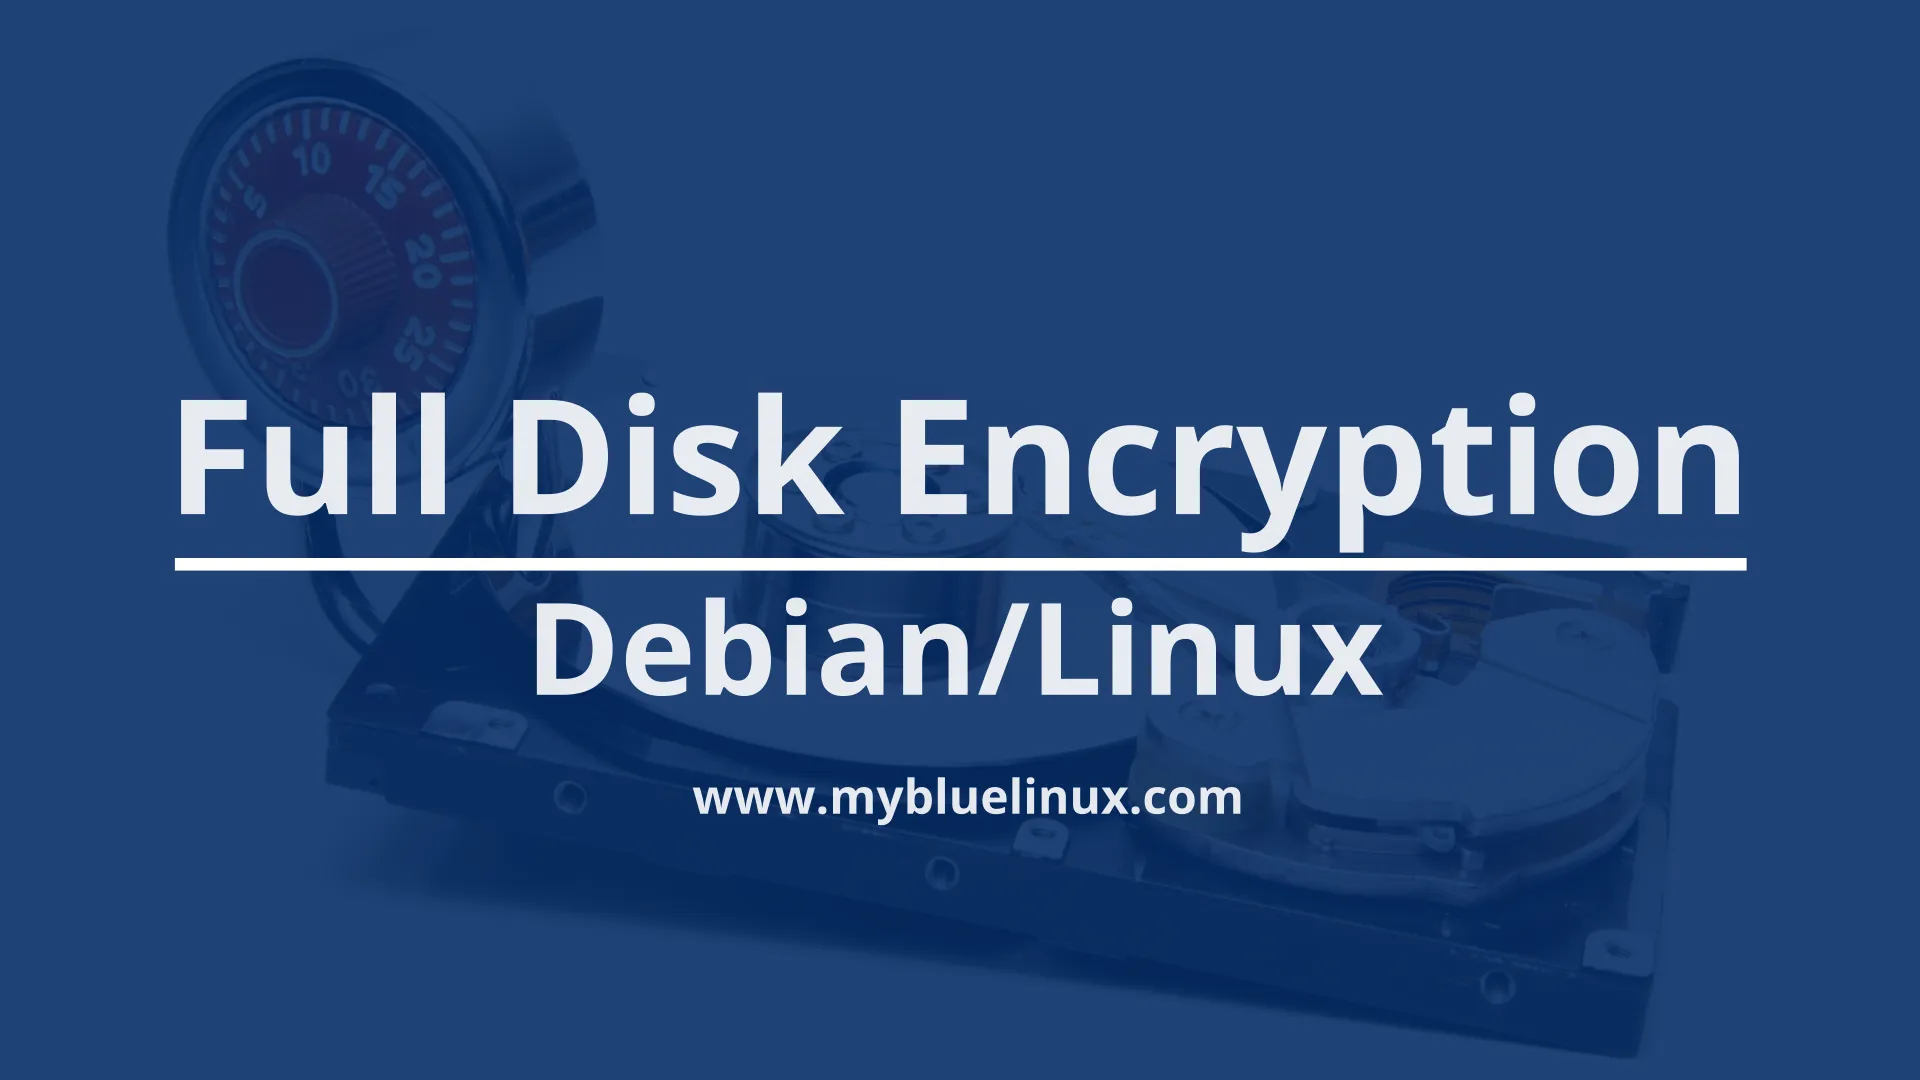 How to Enable Full Disk Encryption with encrypted boot, root partition and ramdisk in Debian - Ubuntu Linux